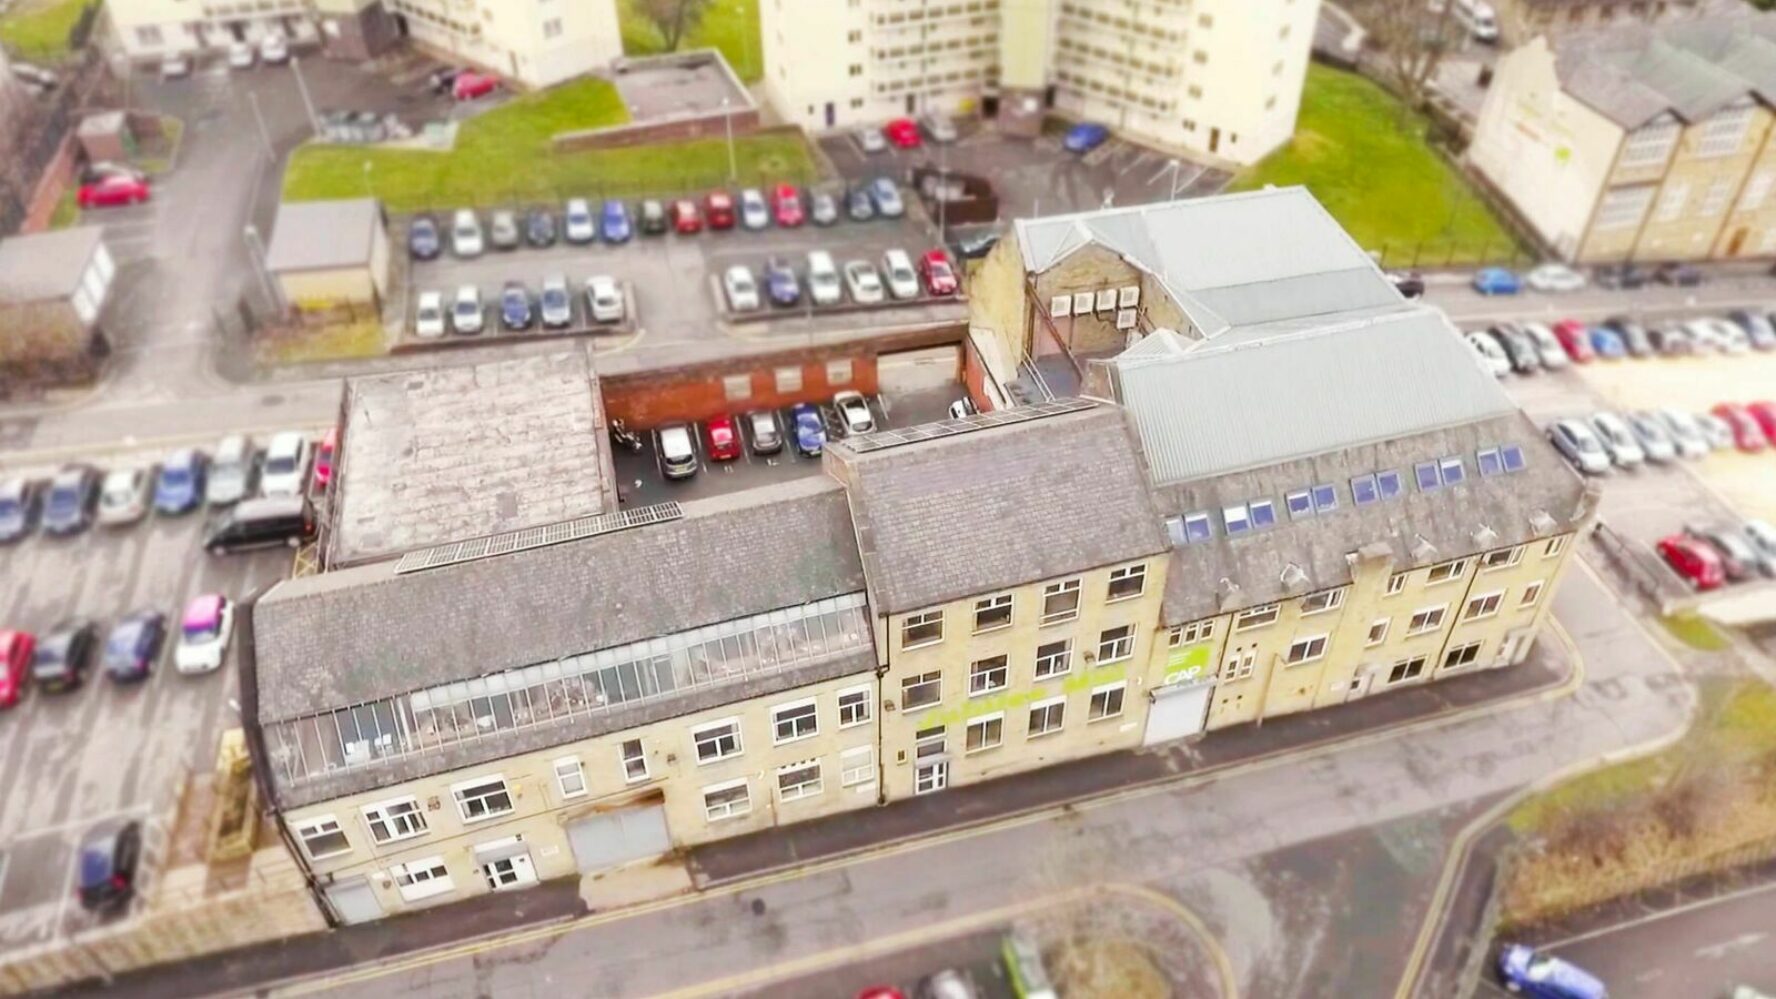 Bird's eye view of the old office building, carpark spaces surrounding it.